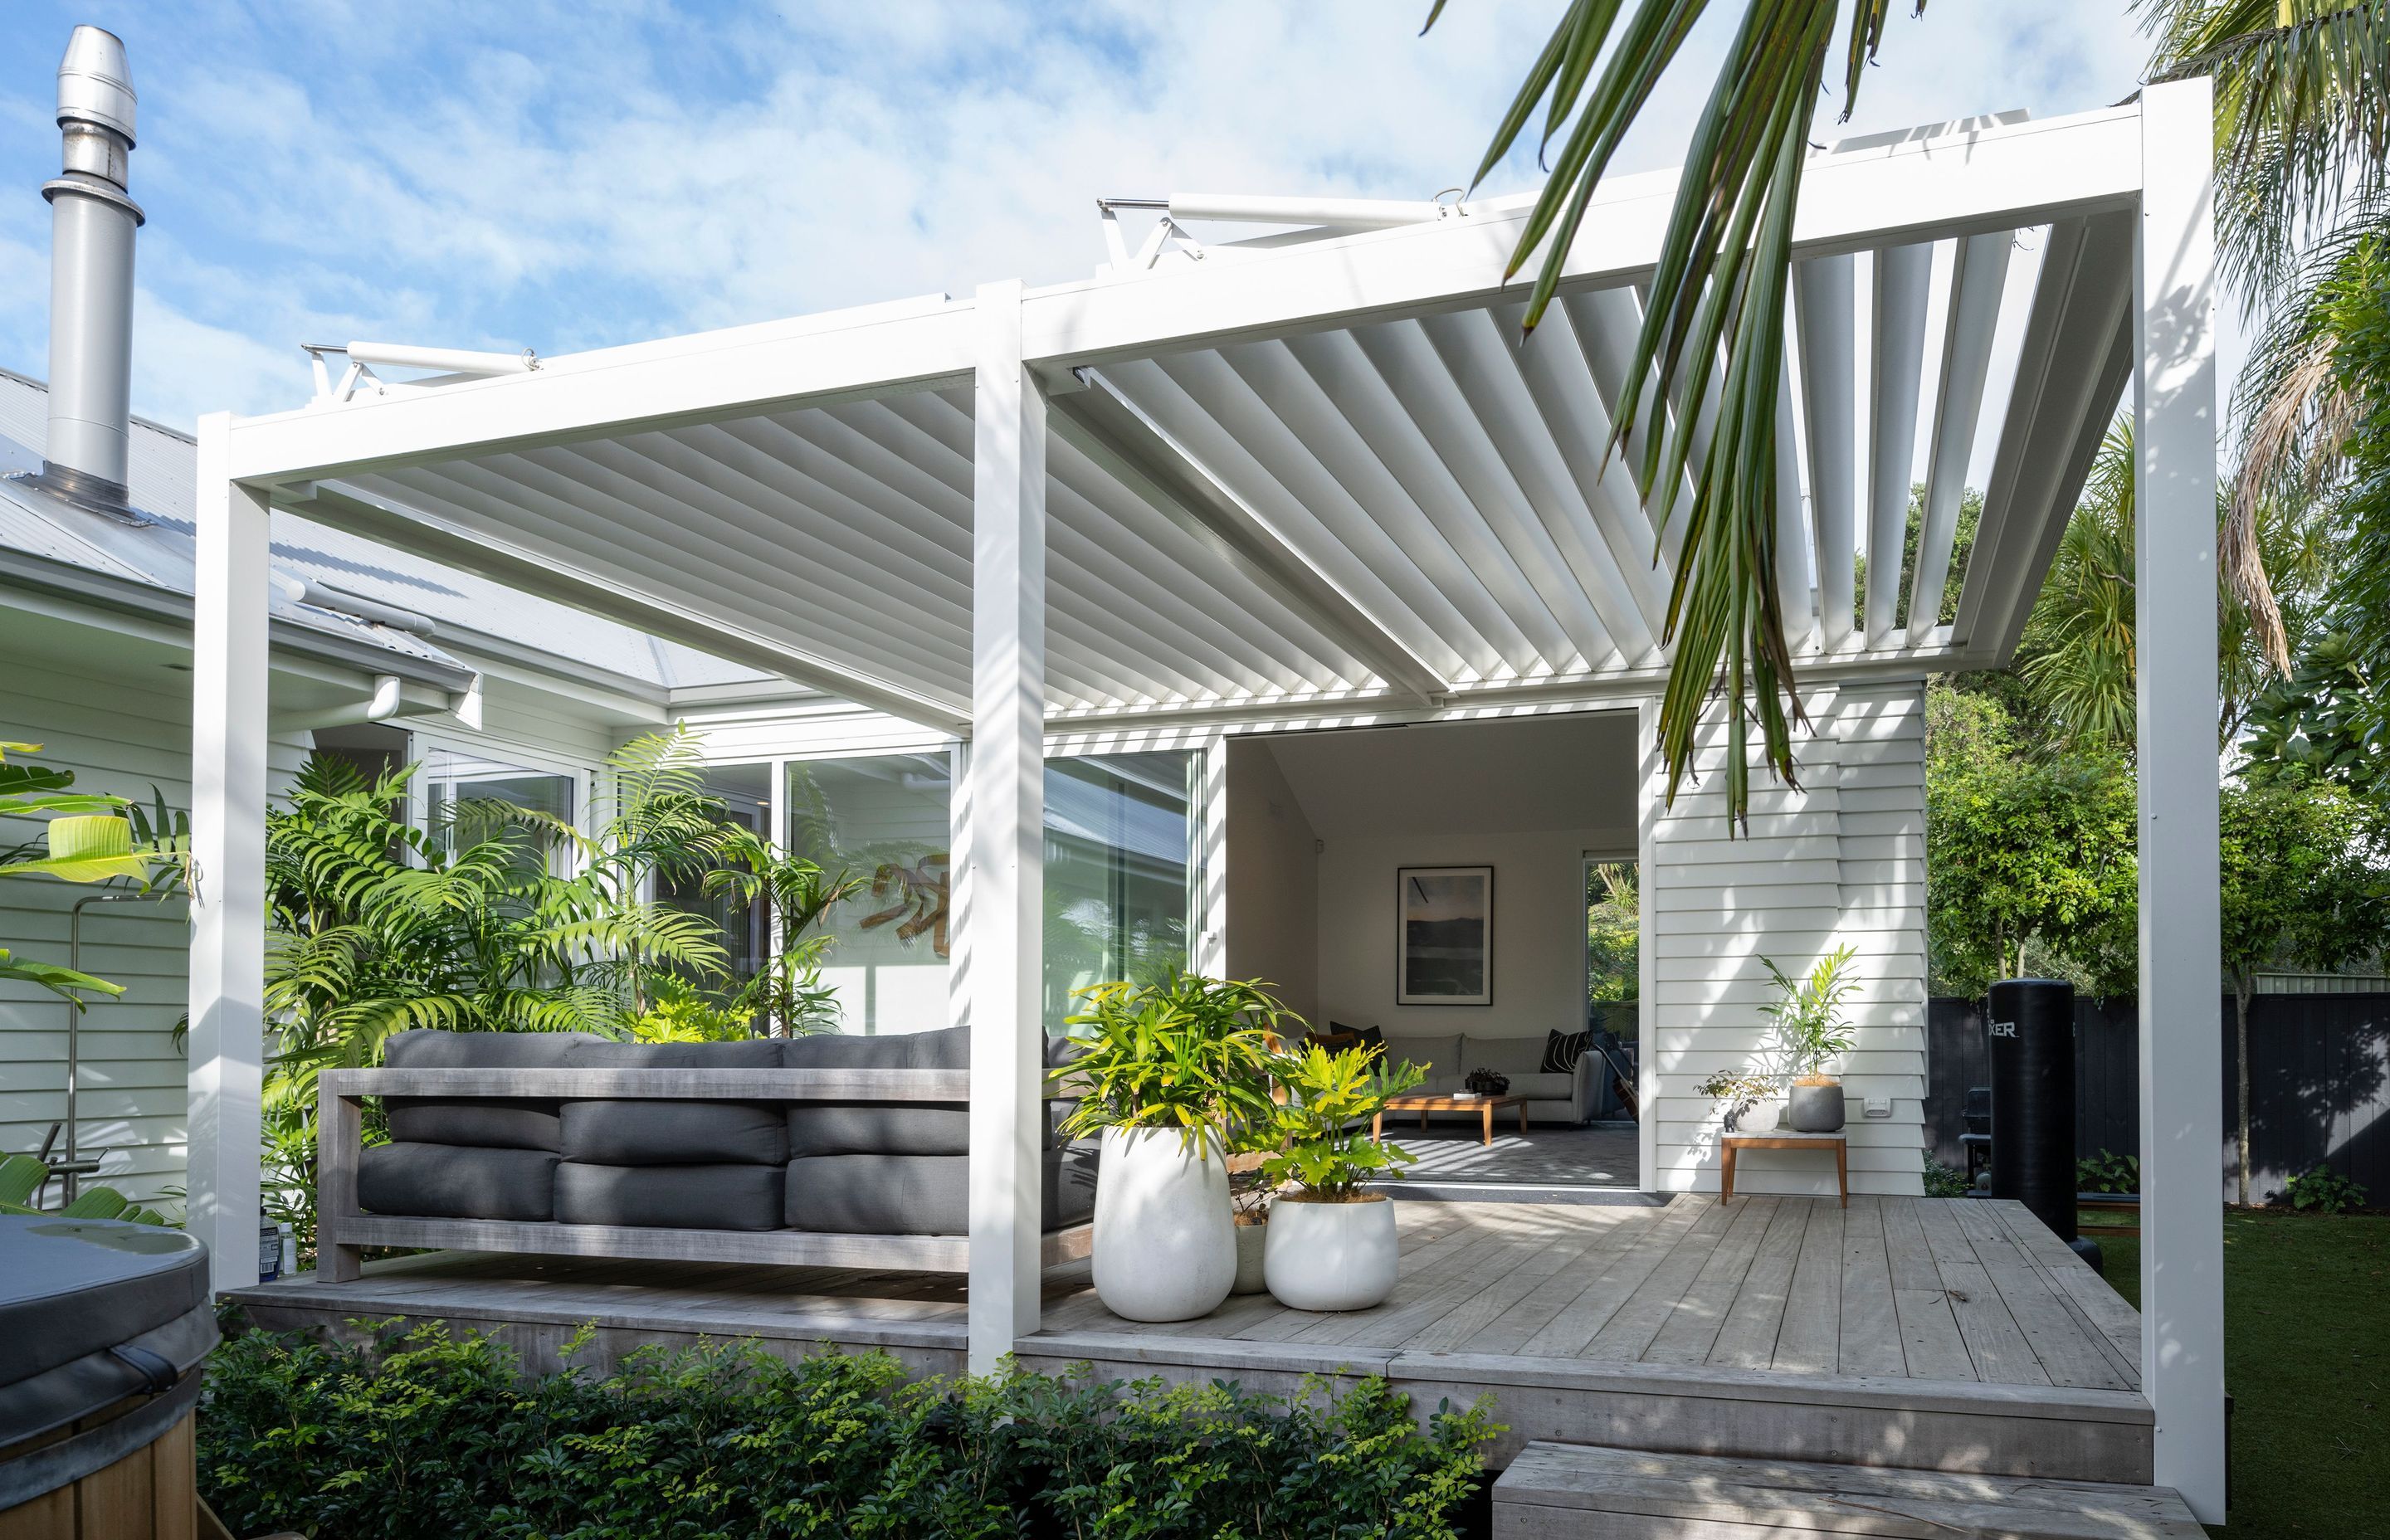 Auckland Home Project. Louvre Roof and Gate Create Oasis of Tranquility